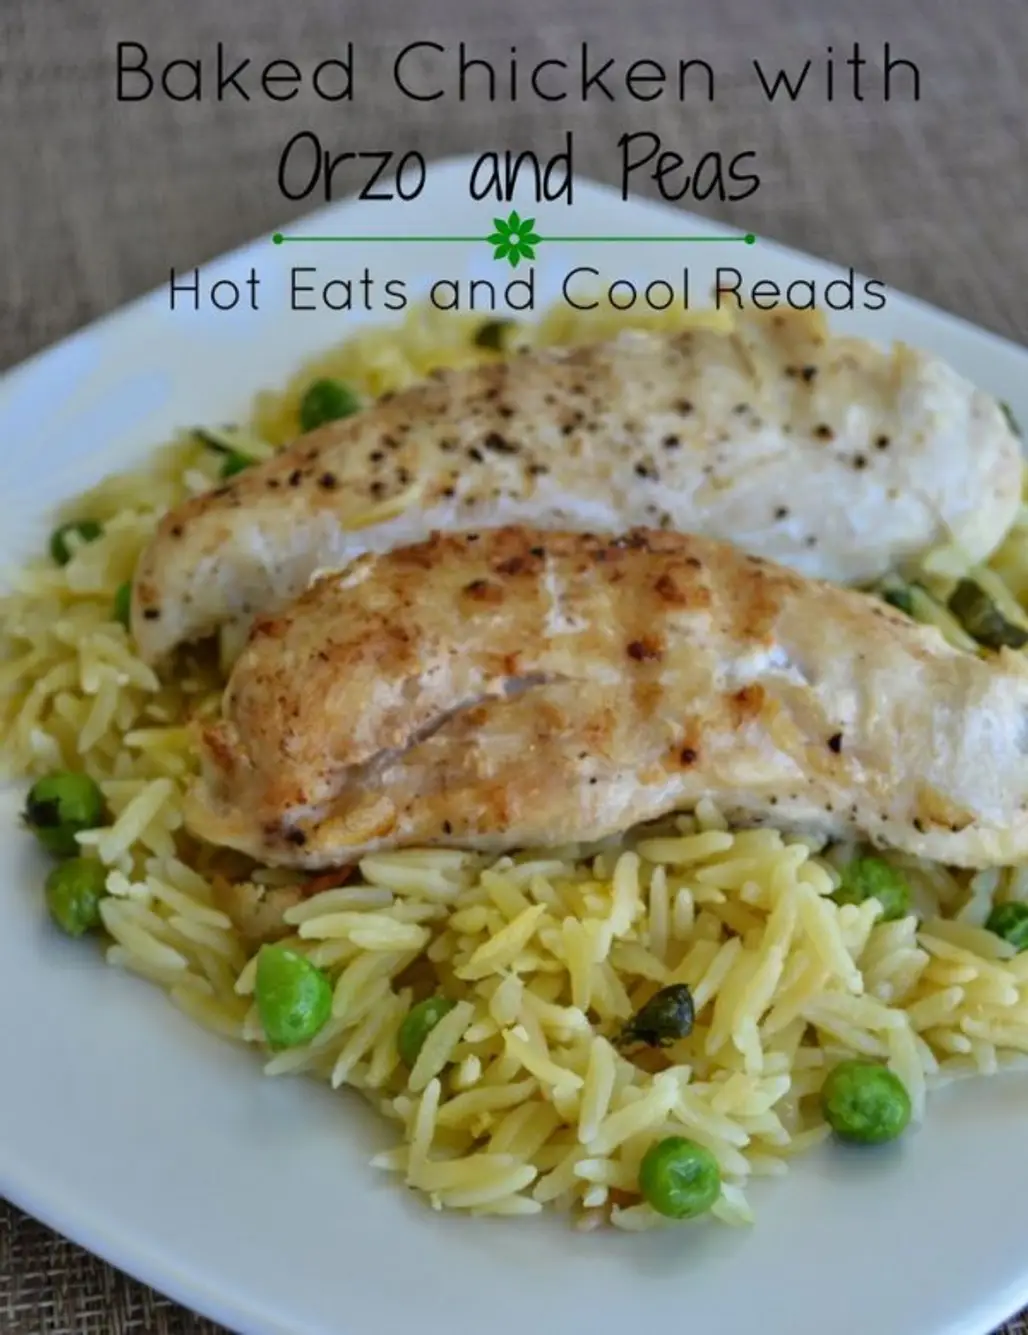 Baked Chicken Tenderloins with Orzo and Peas